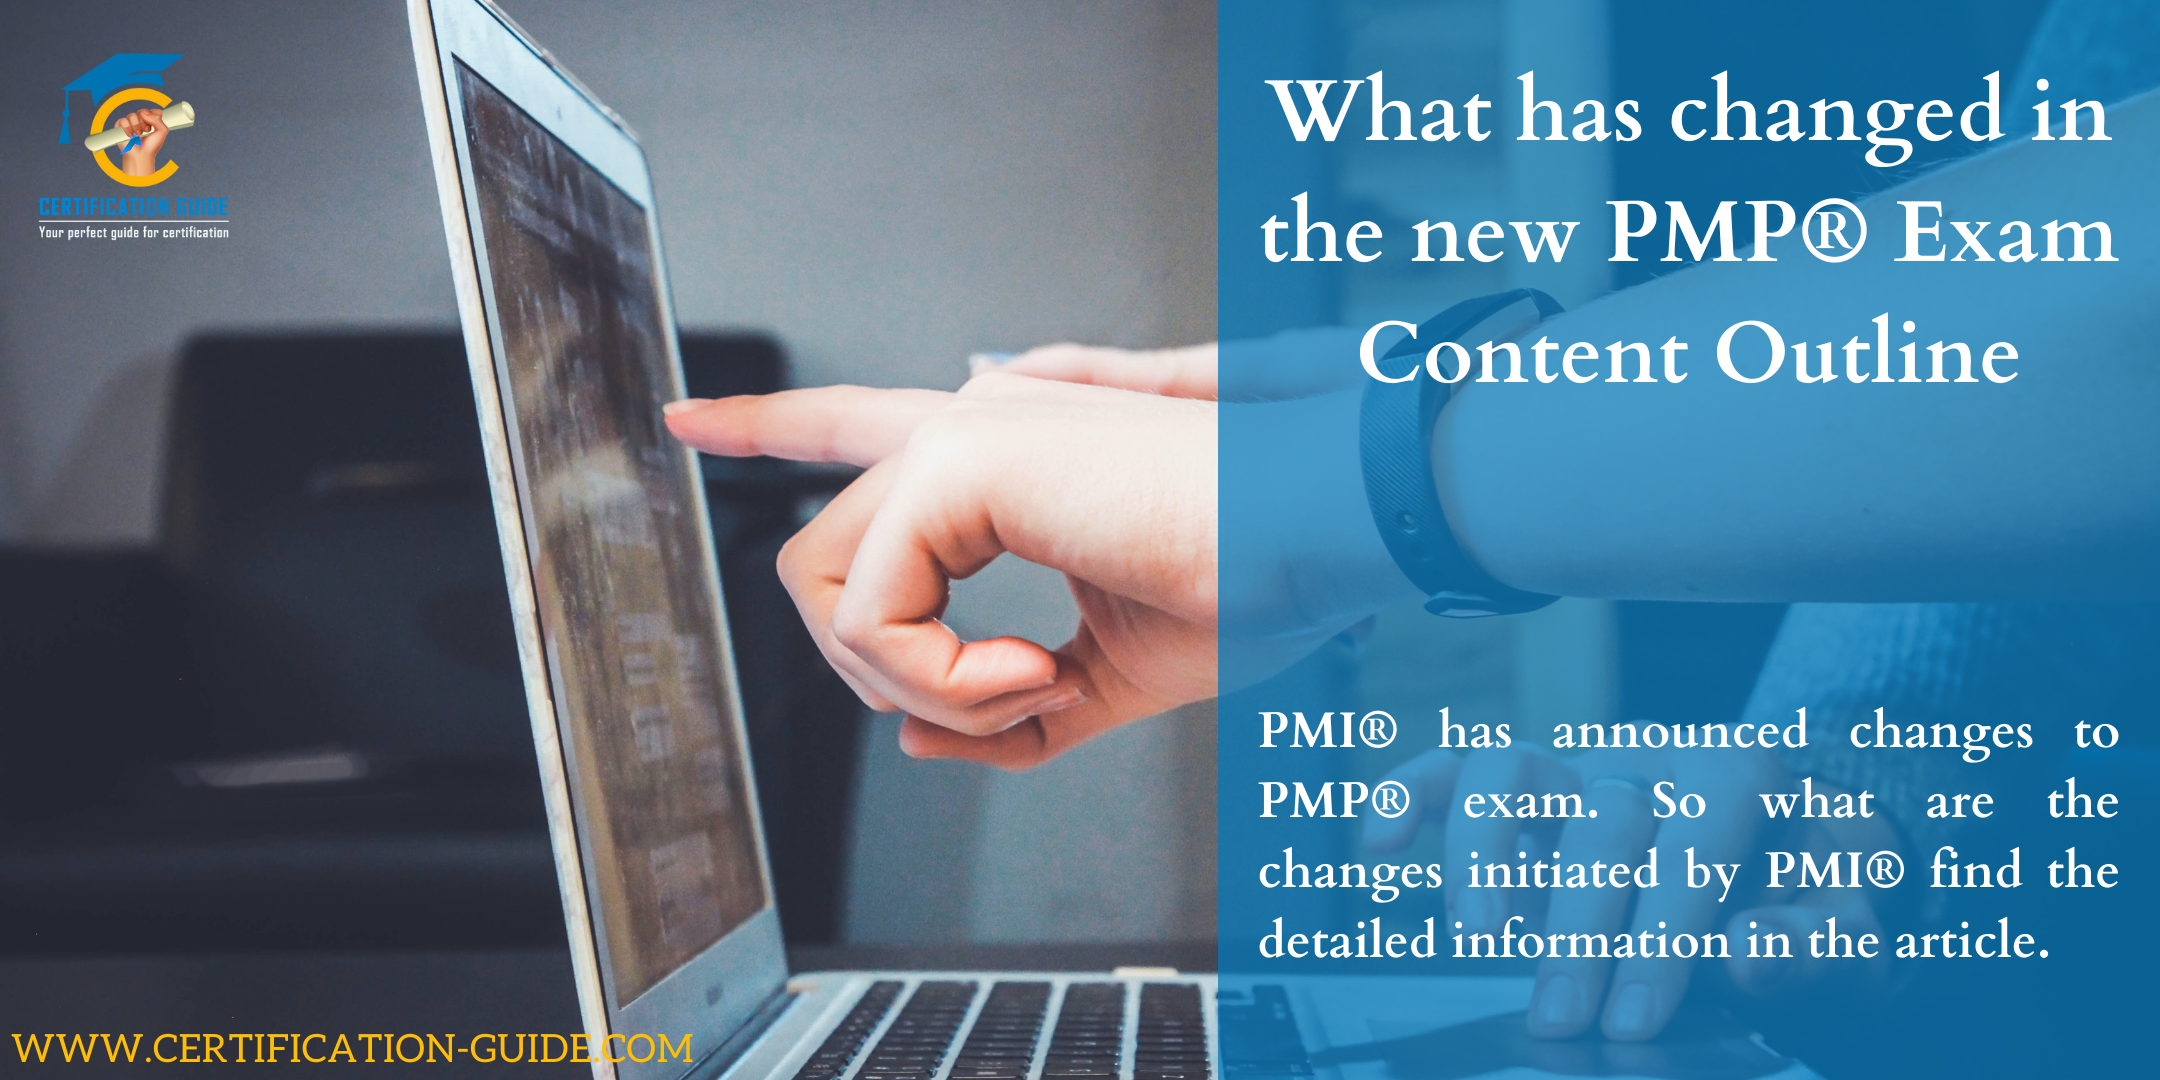 PMP Exam content outline changes